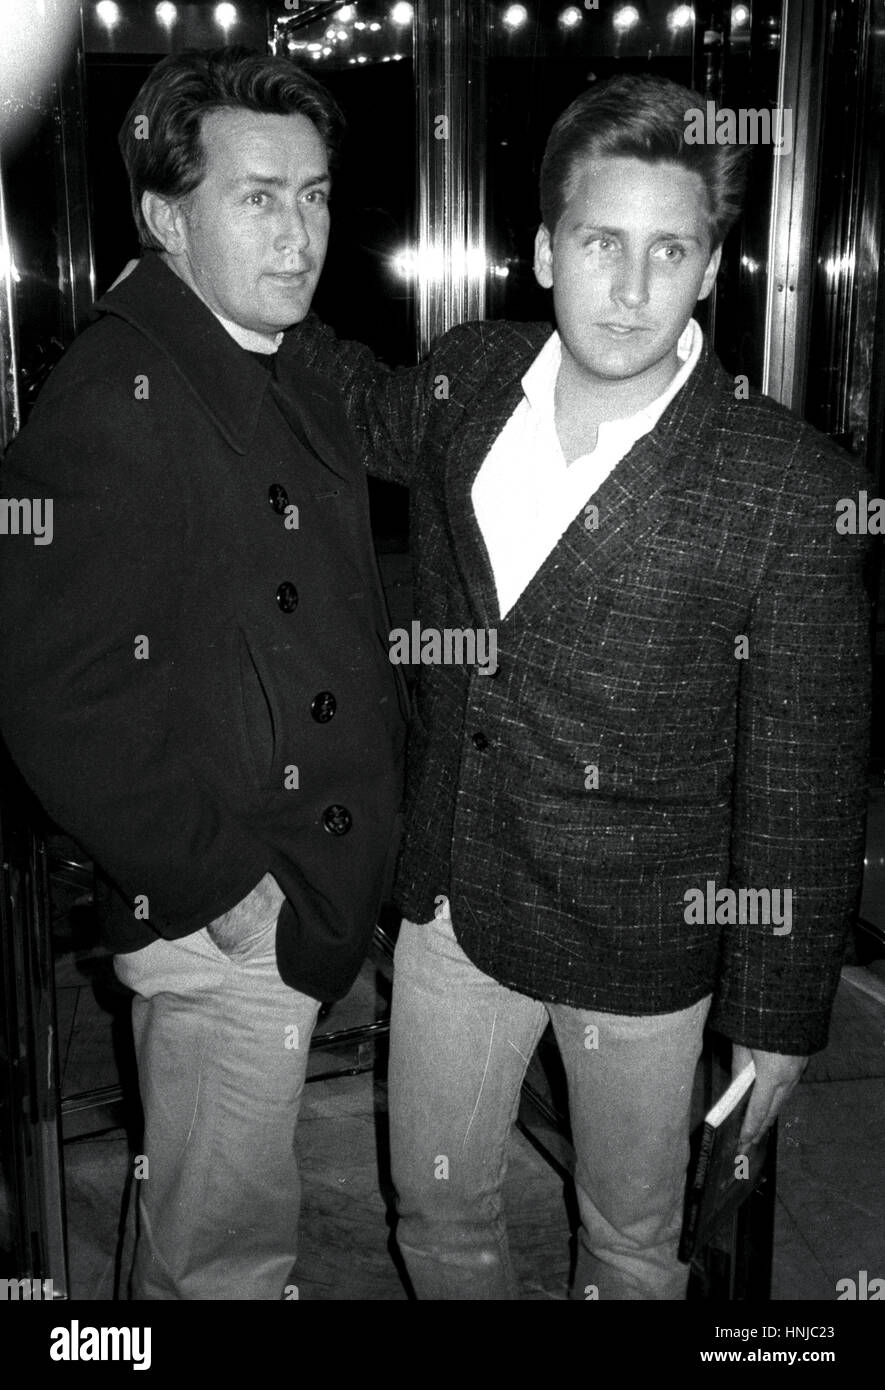 Martin Sheen with his son Emilio Estevez Arriving at the Parker Meriden Hotel in New York City Stock Photo